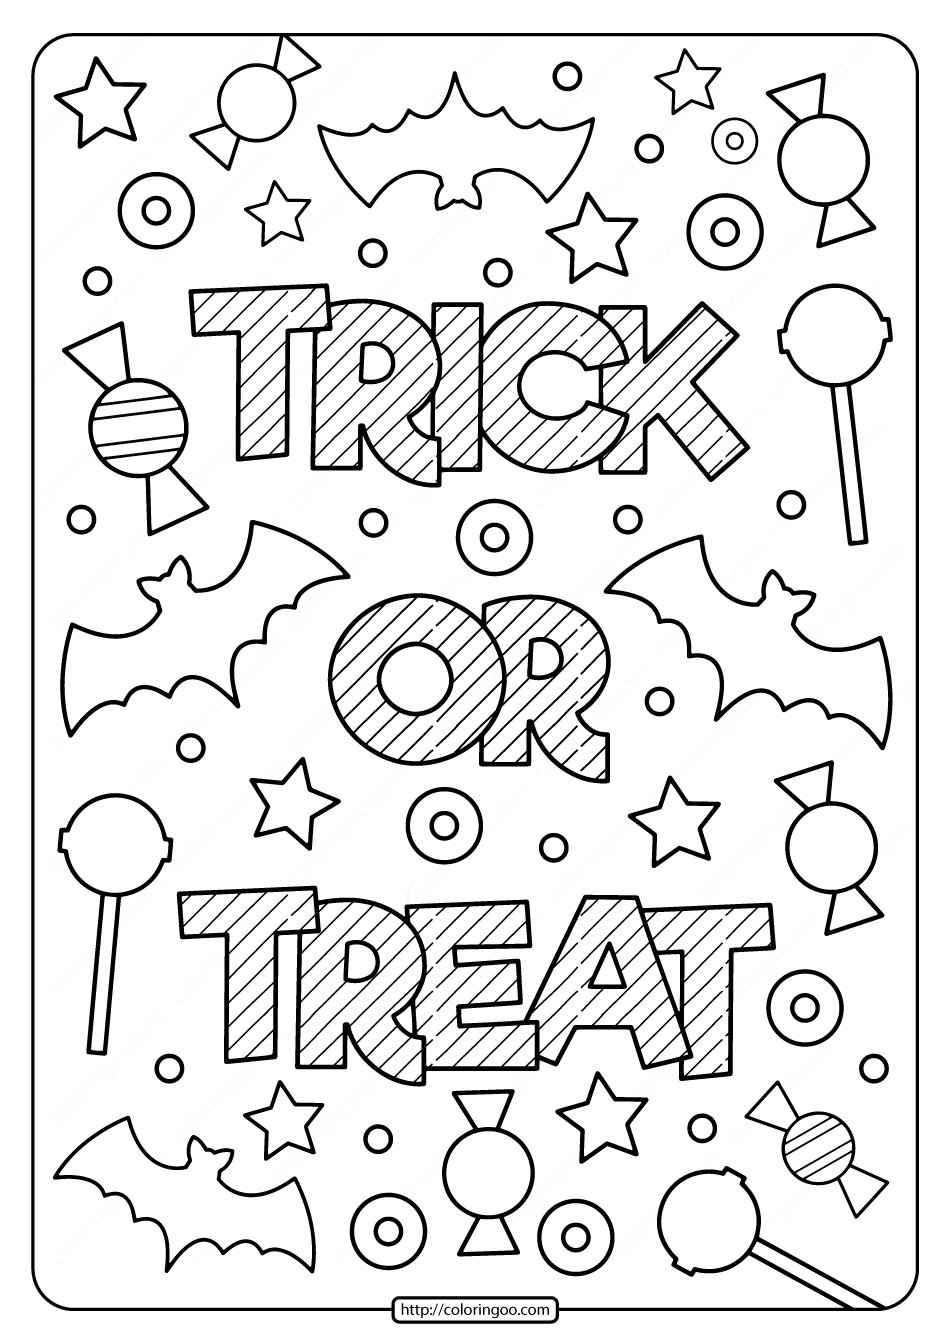 Printable trick or treat coloring pages halloween coloring sheets free halloween coloring pages halloween coloring